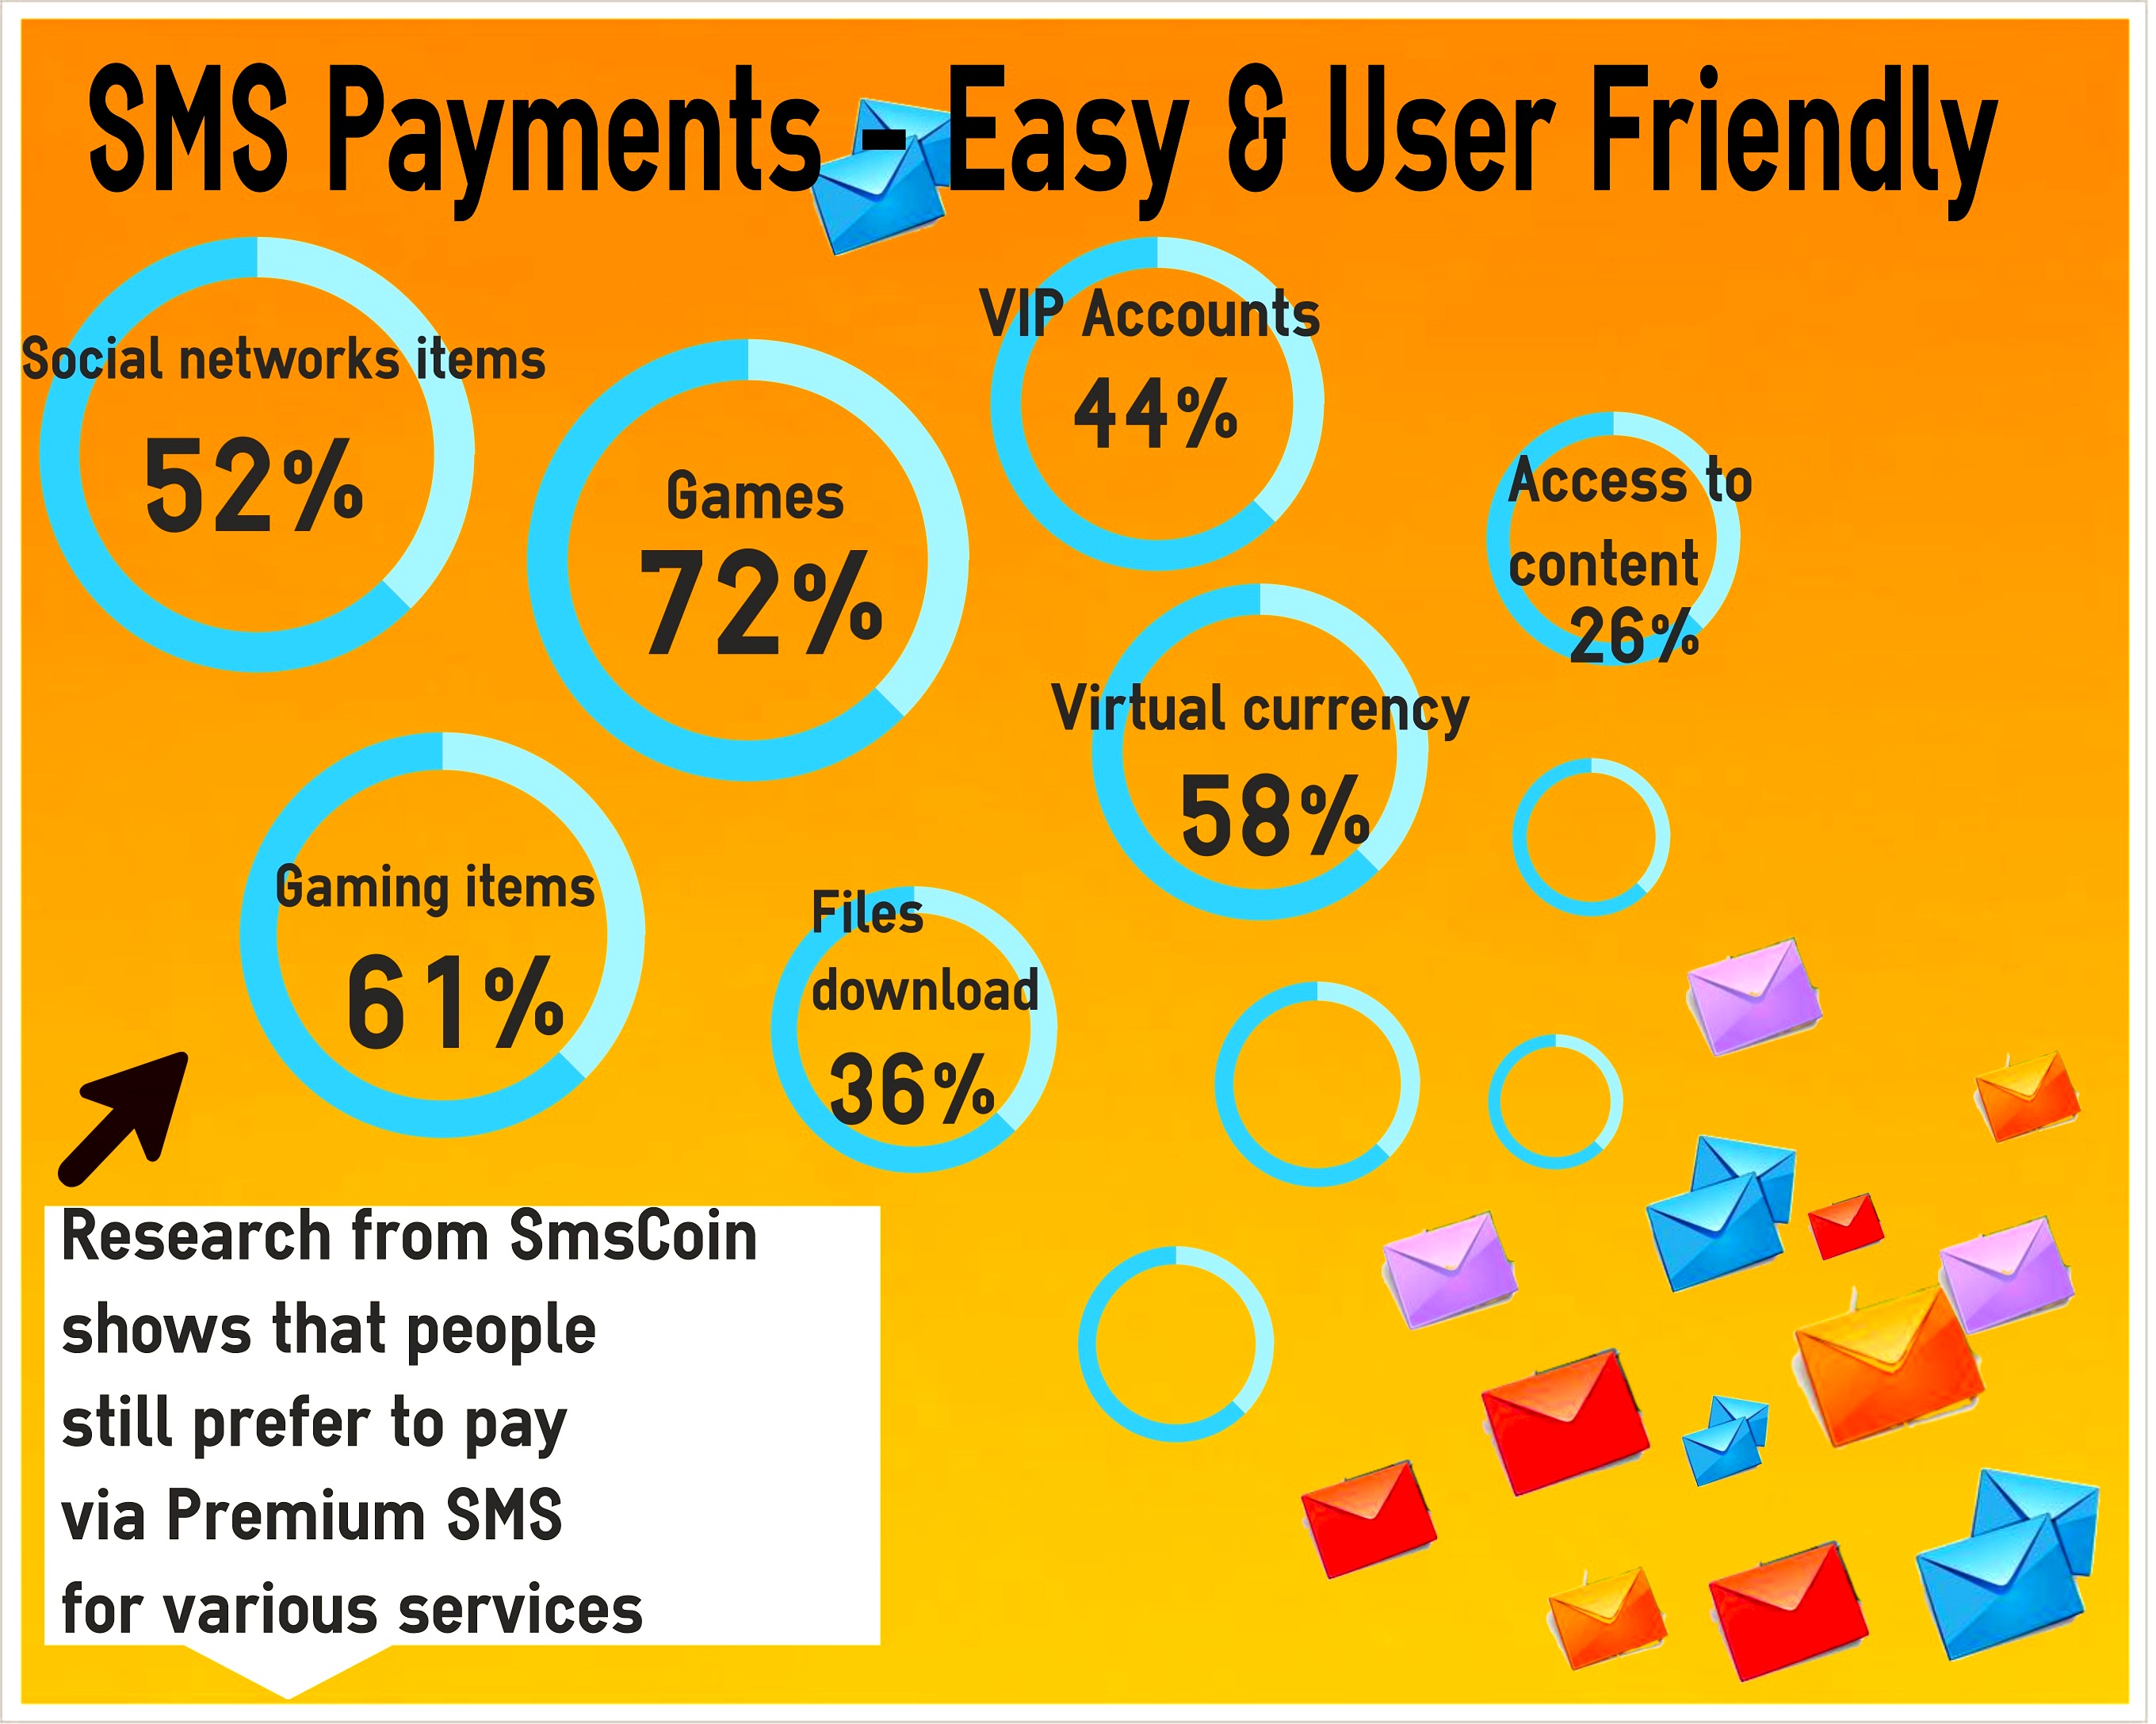 SMS Payments - Easy & User Friendly